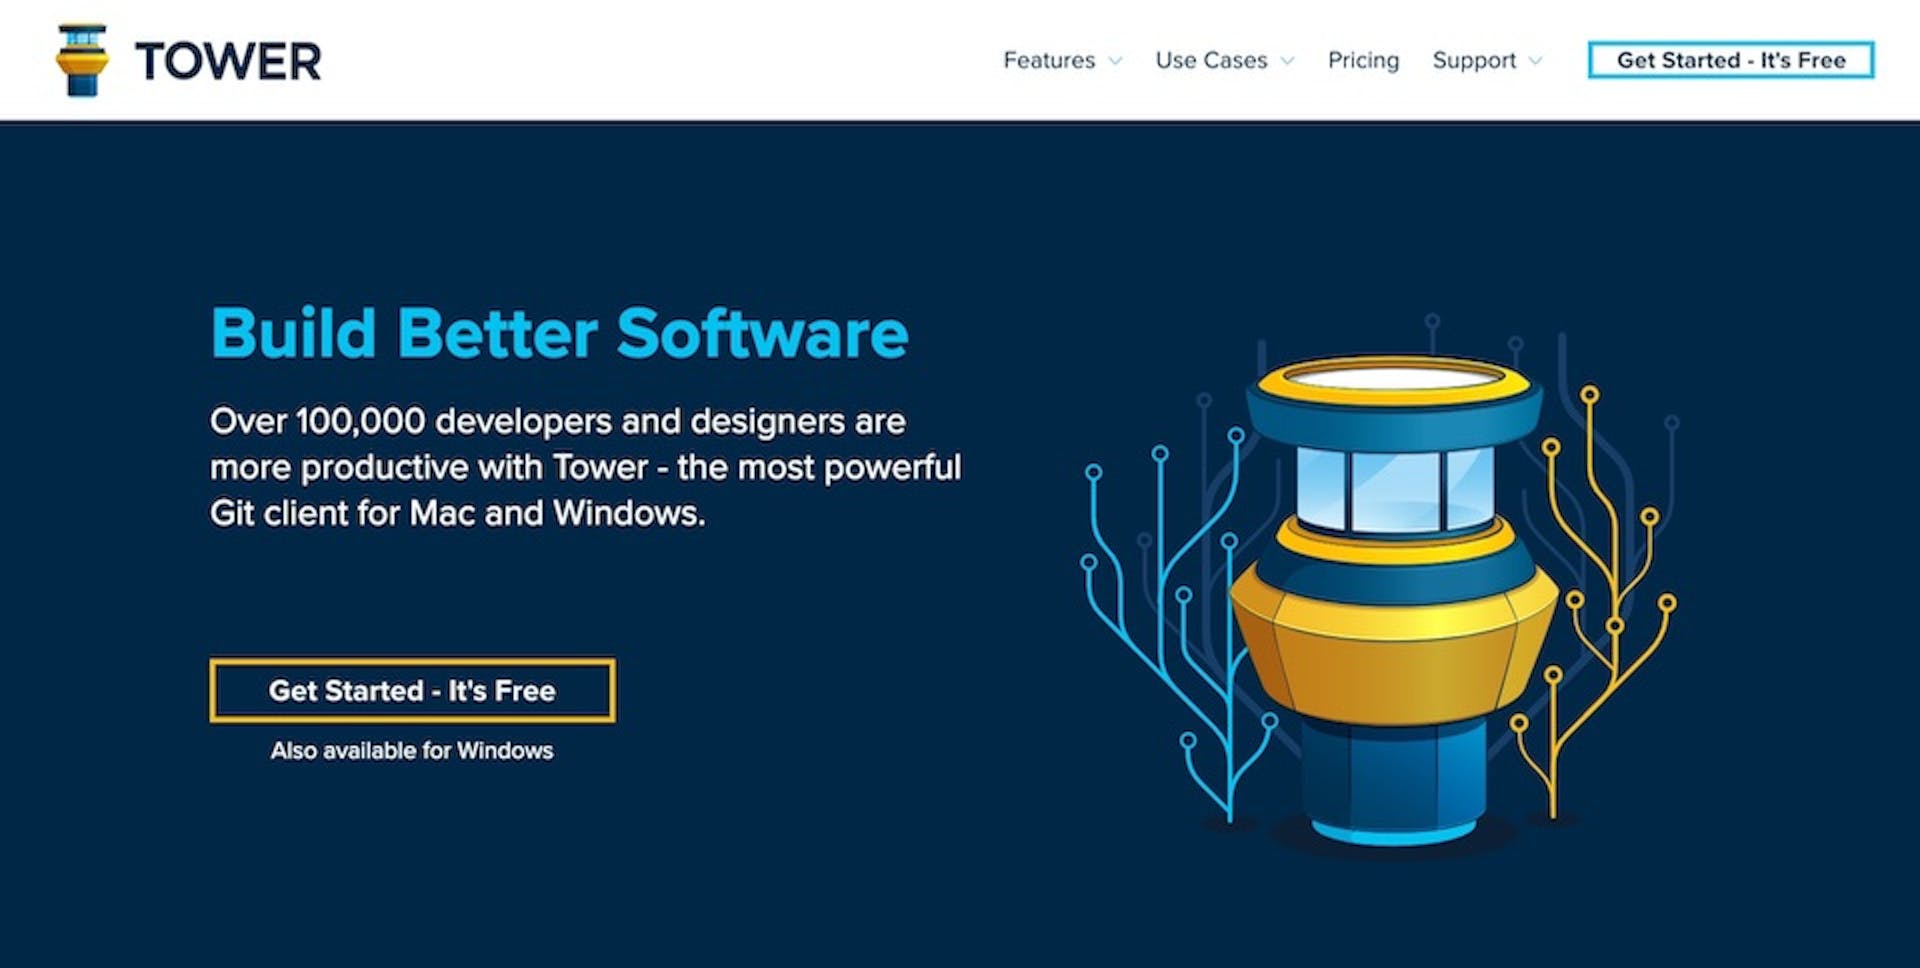 How Tower Moved to a Subscription-based Model and Grew Revenue by